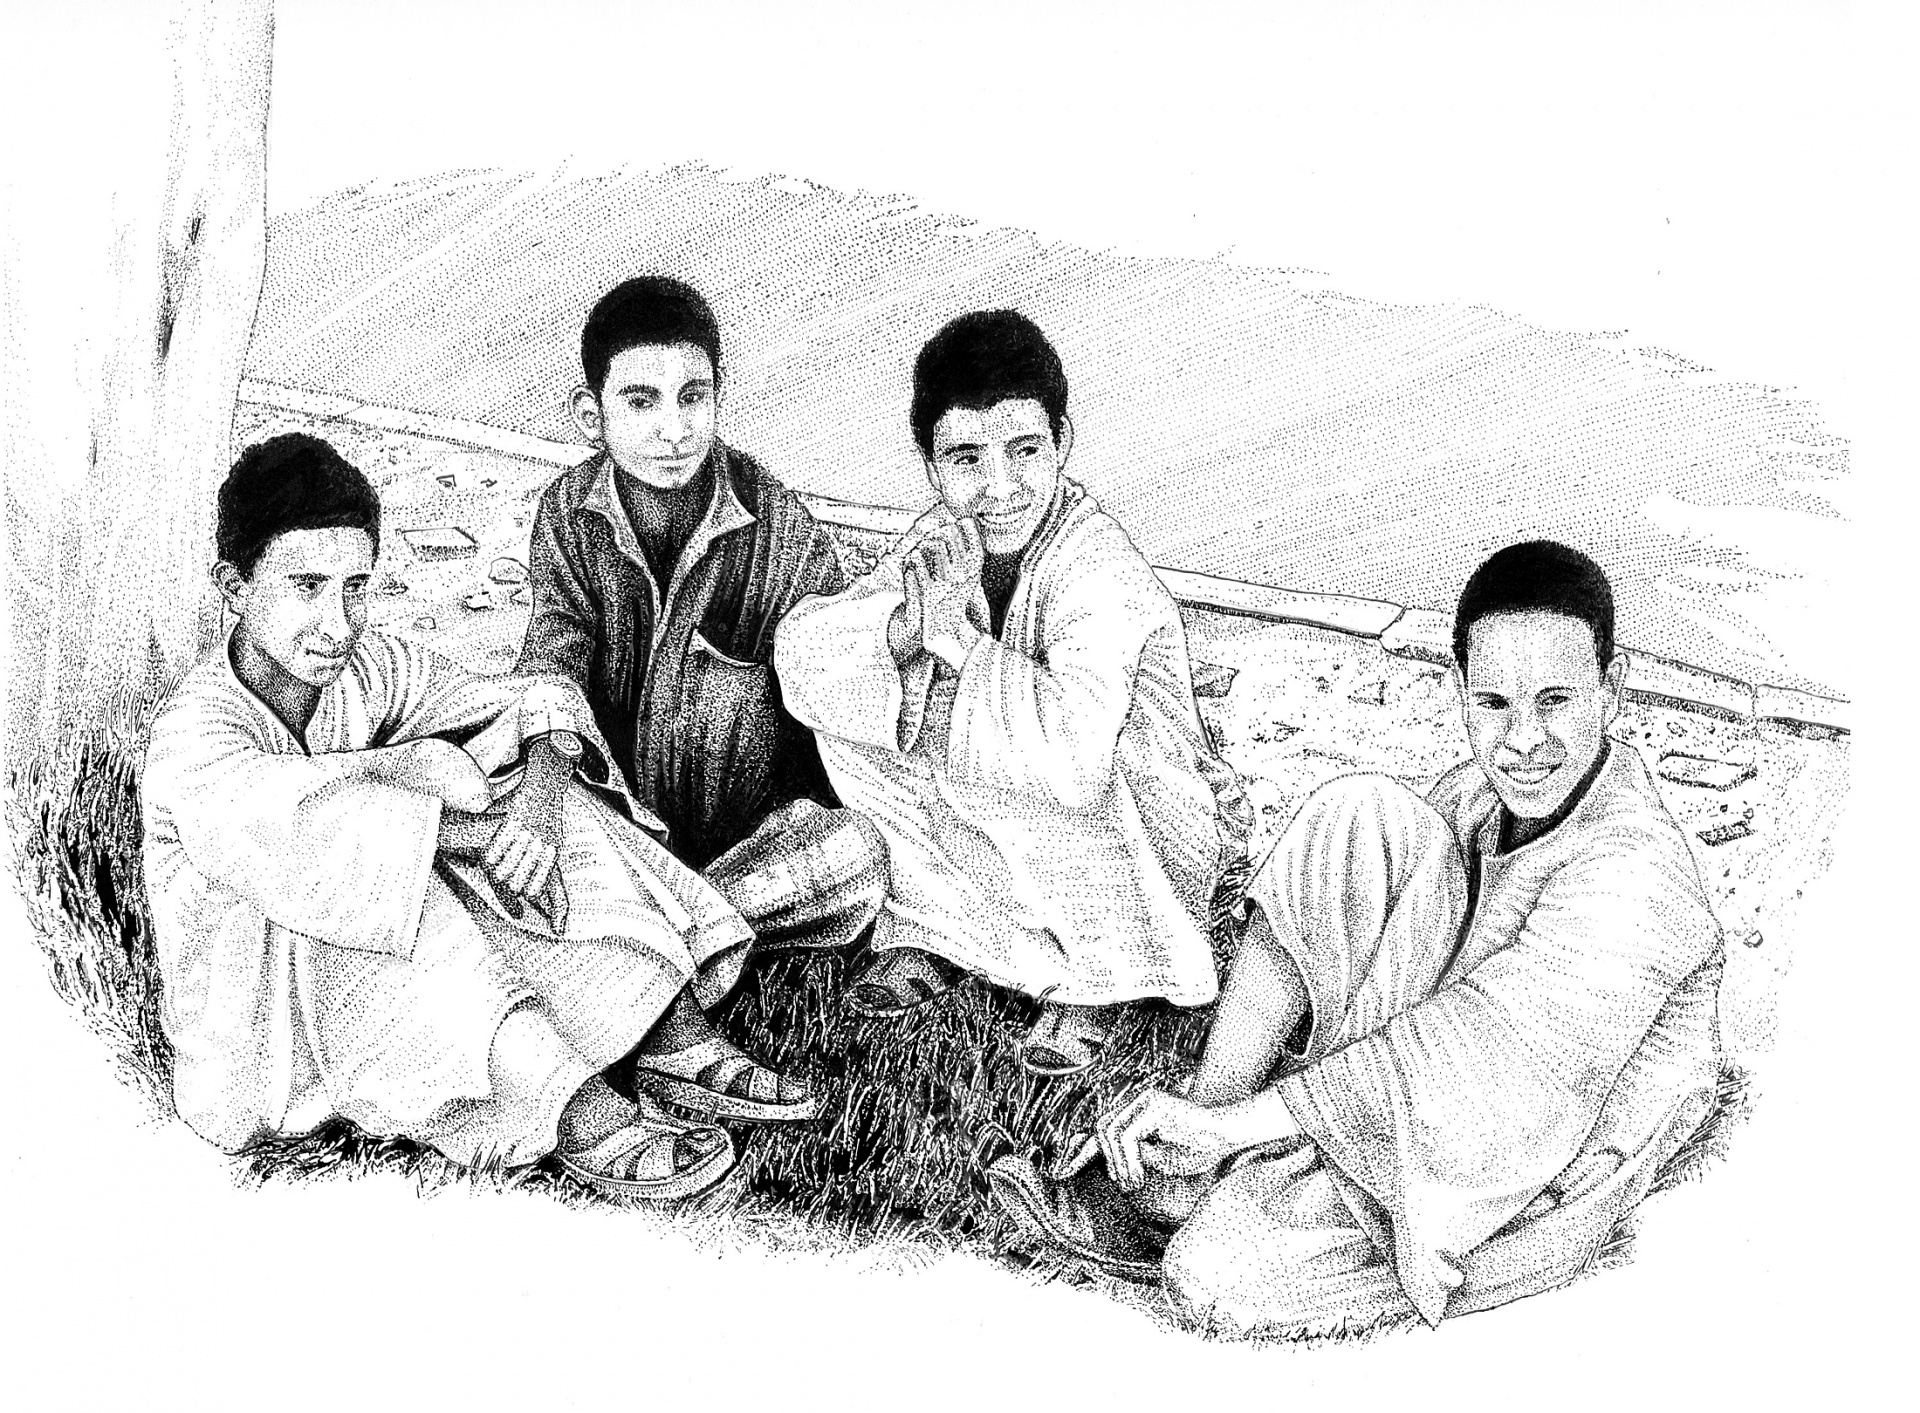 Black ink drawing of a group of local boys chatting in the shade by the roadside in Luxor, Egypt